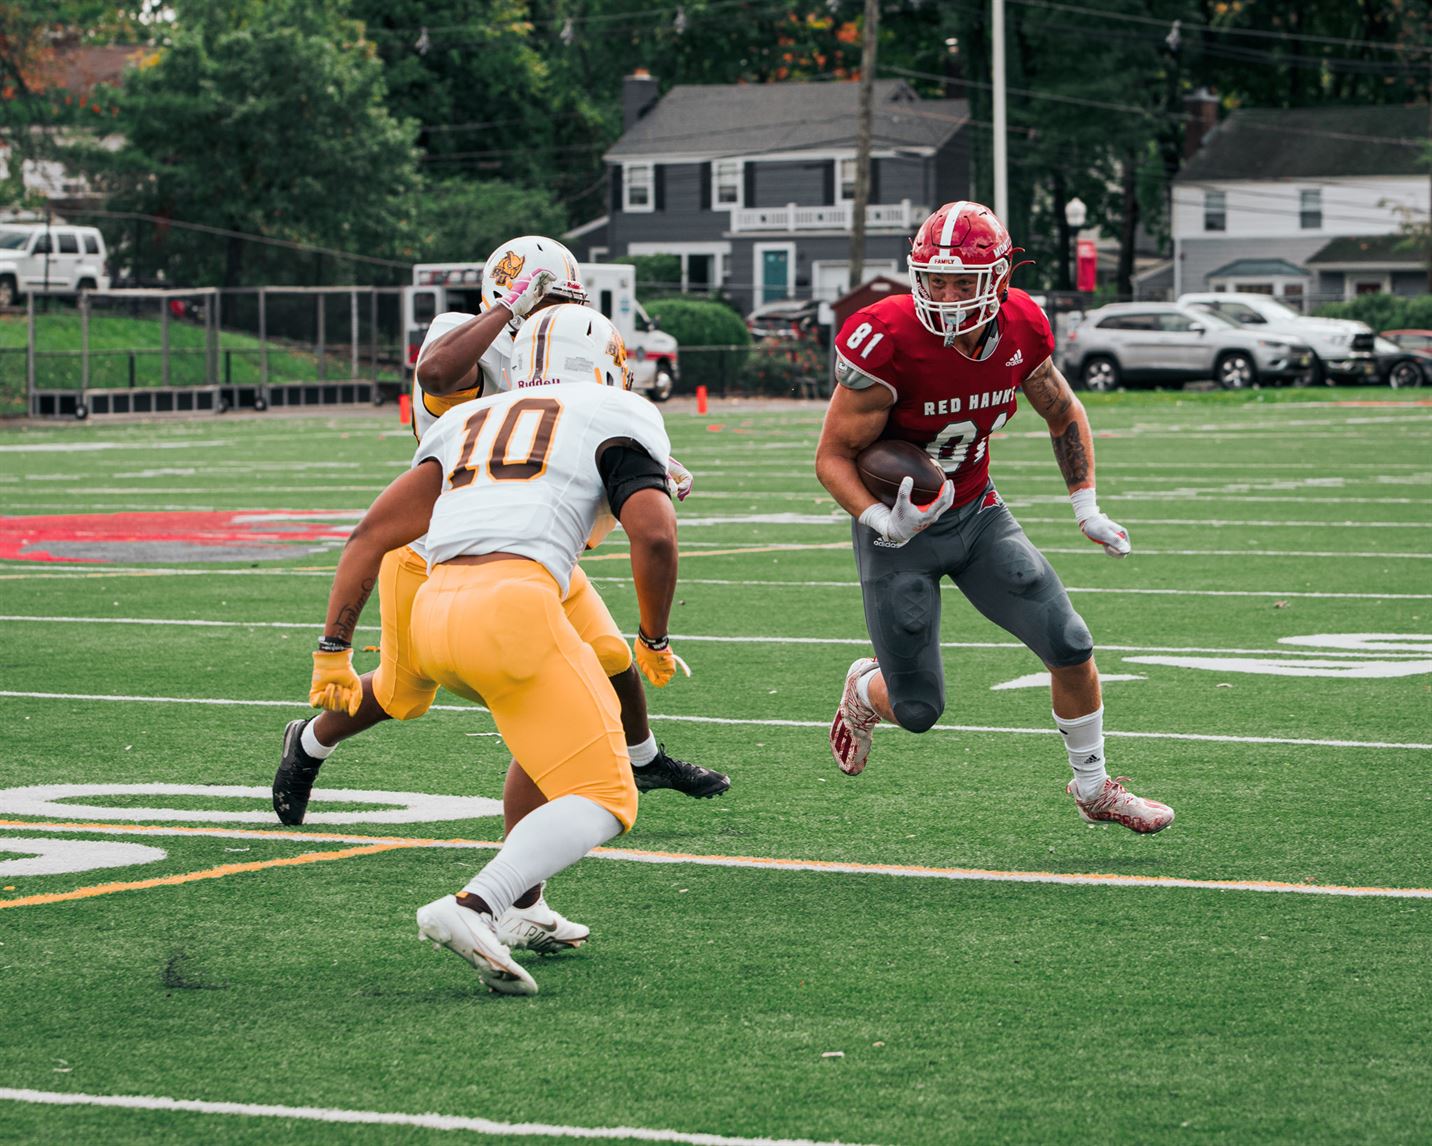 Sophomore tight end Eric Cowan tries to get past two Rowan University defenders. Kevin Murrugarra | The Montclarion